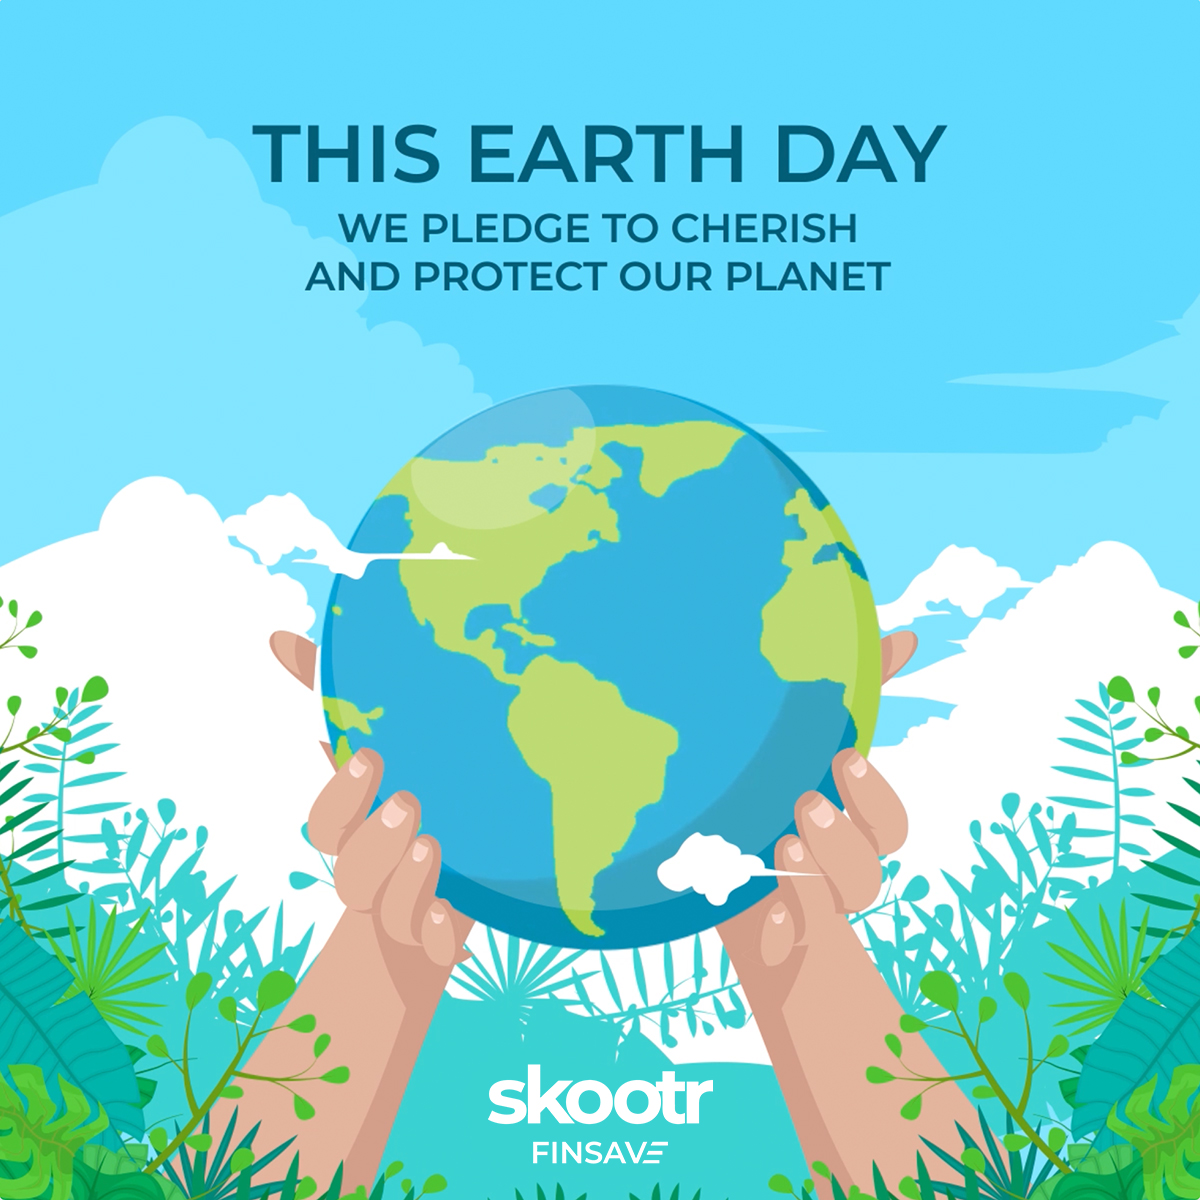 Today is a reminder to take steps throughout the year to restore our precious earth. At Skootr FinSave, we pledge to cherish our planet, by adding to greenery, and using environment friendly solutions. What do you pledge this #EarthDay? Leave your comments below.
#PledgeForEarth